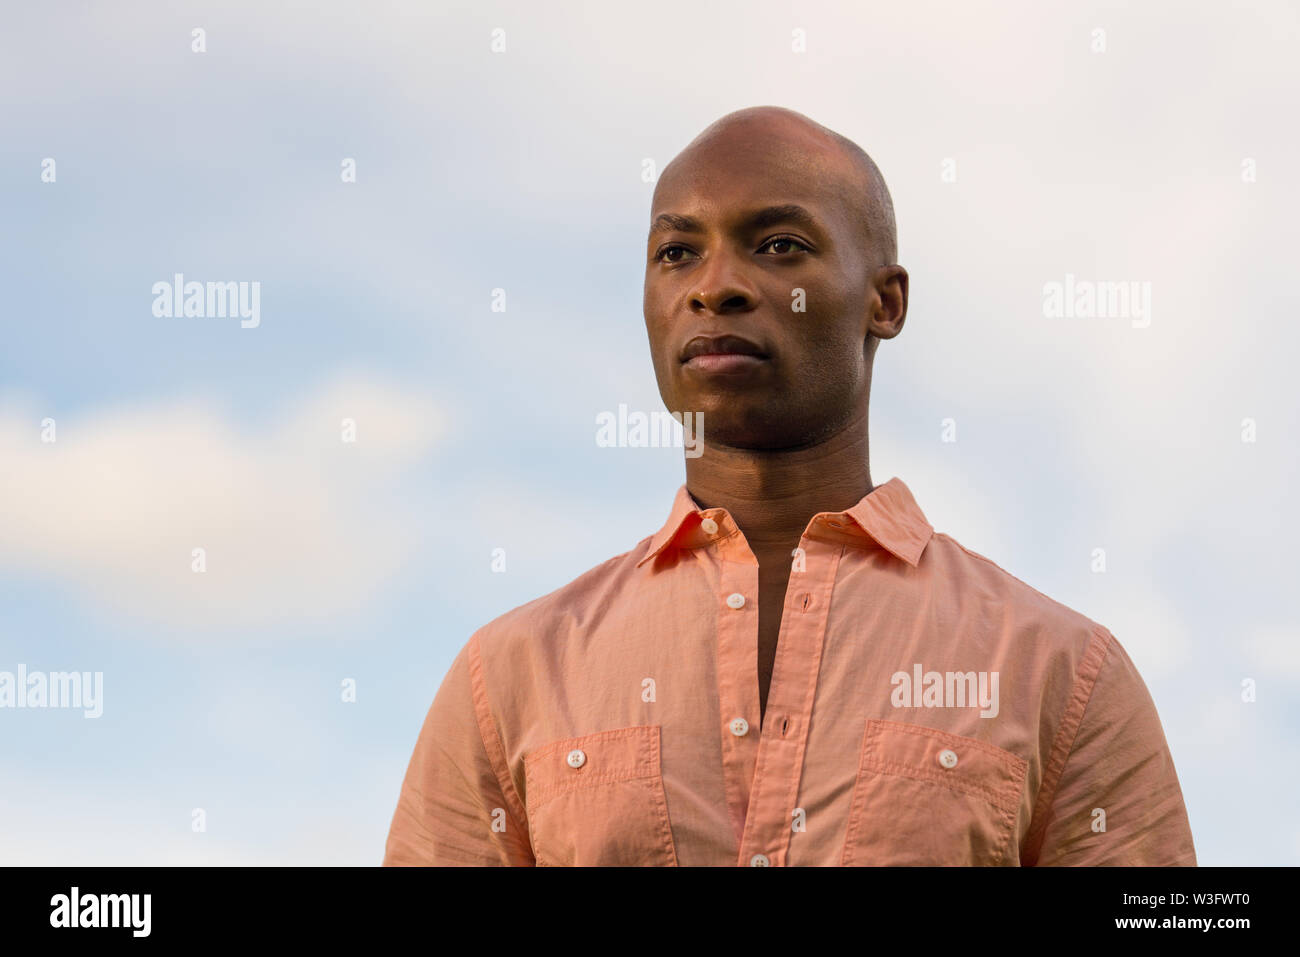 Portrait of a handsome black businessman glancing over the camera. Light blue cloudy sky in the background with copyspace Stock Photo